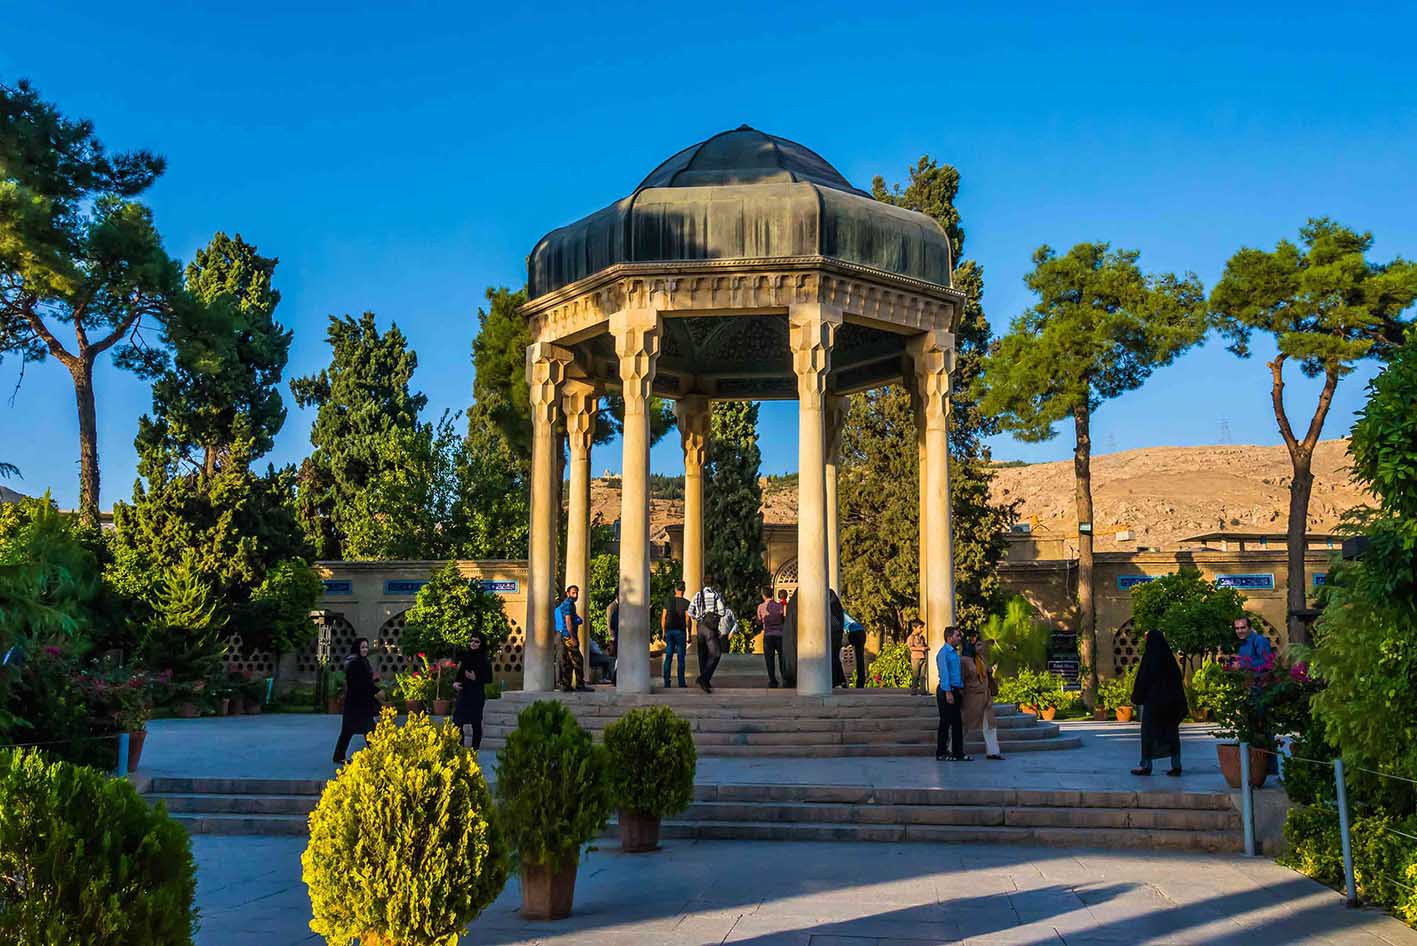 Hafez, the great Persian poet of the 14th century 